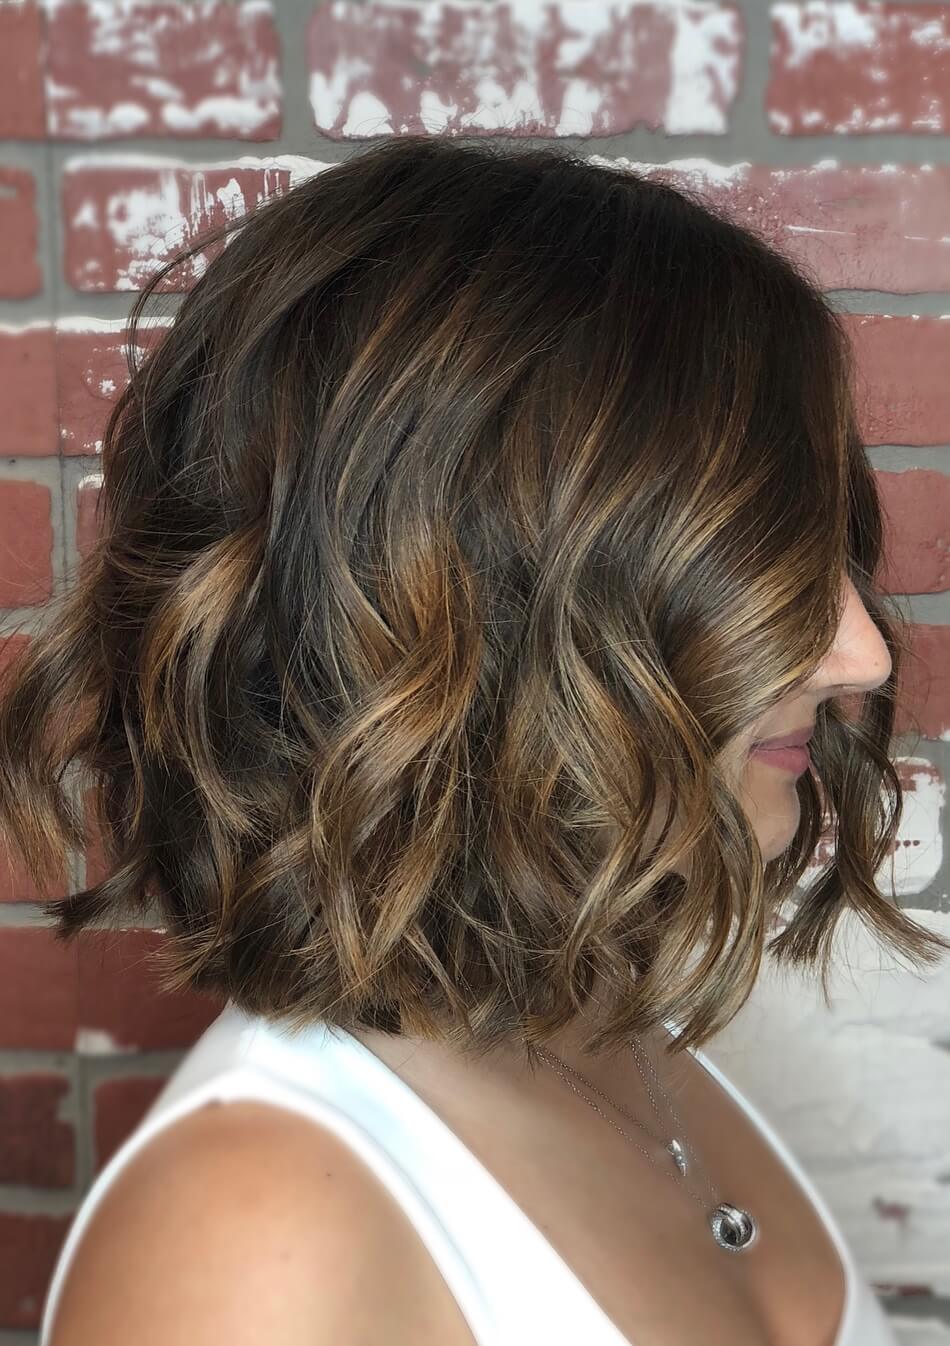 Blunt Cut With Blonde Color - Cute Bob Hairstyles